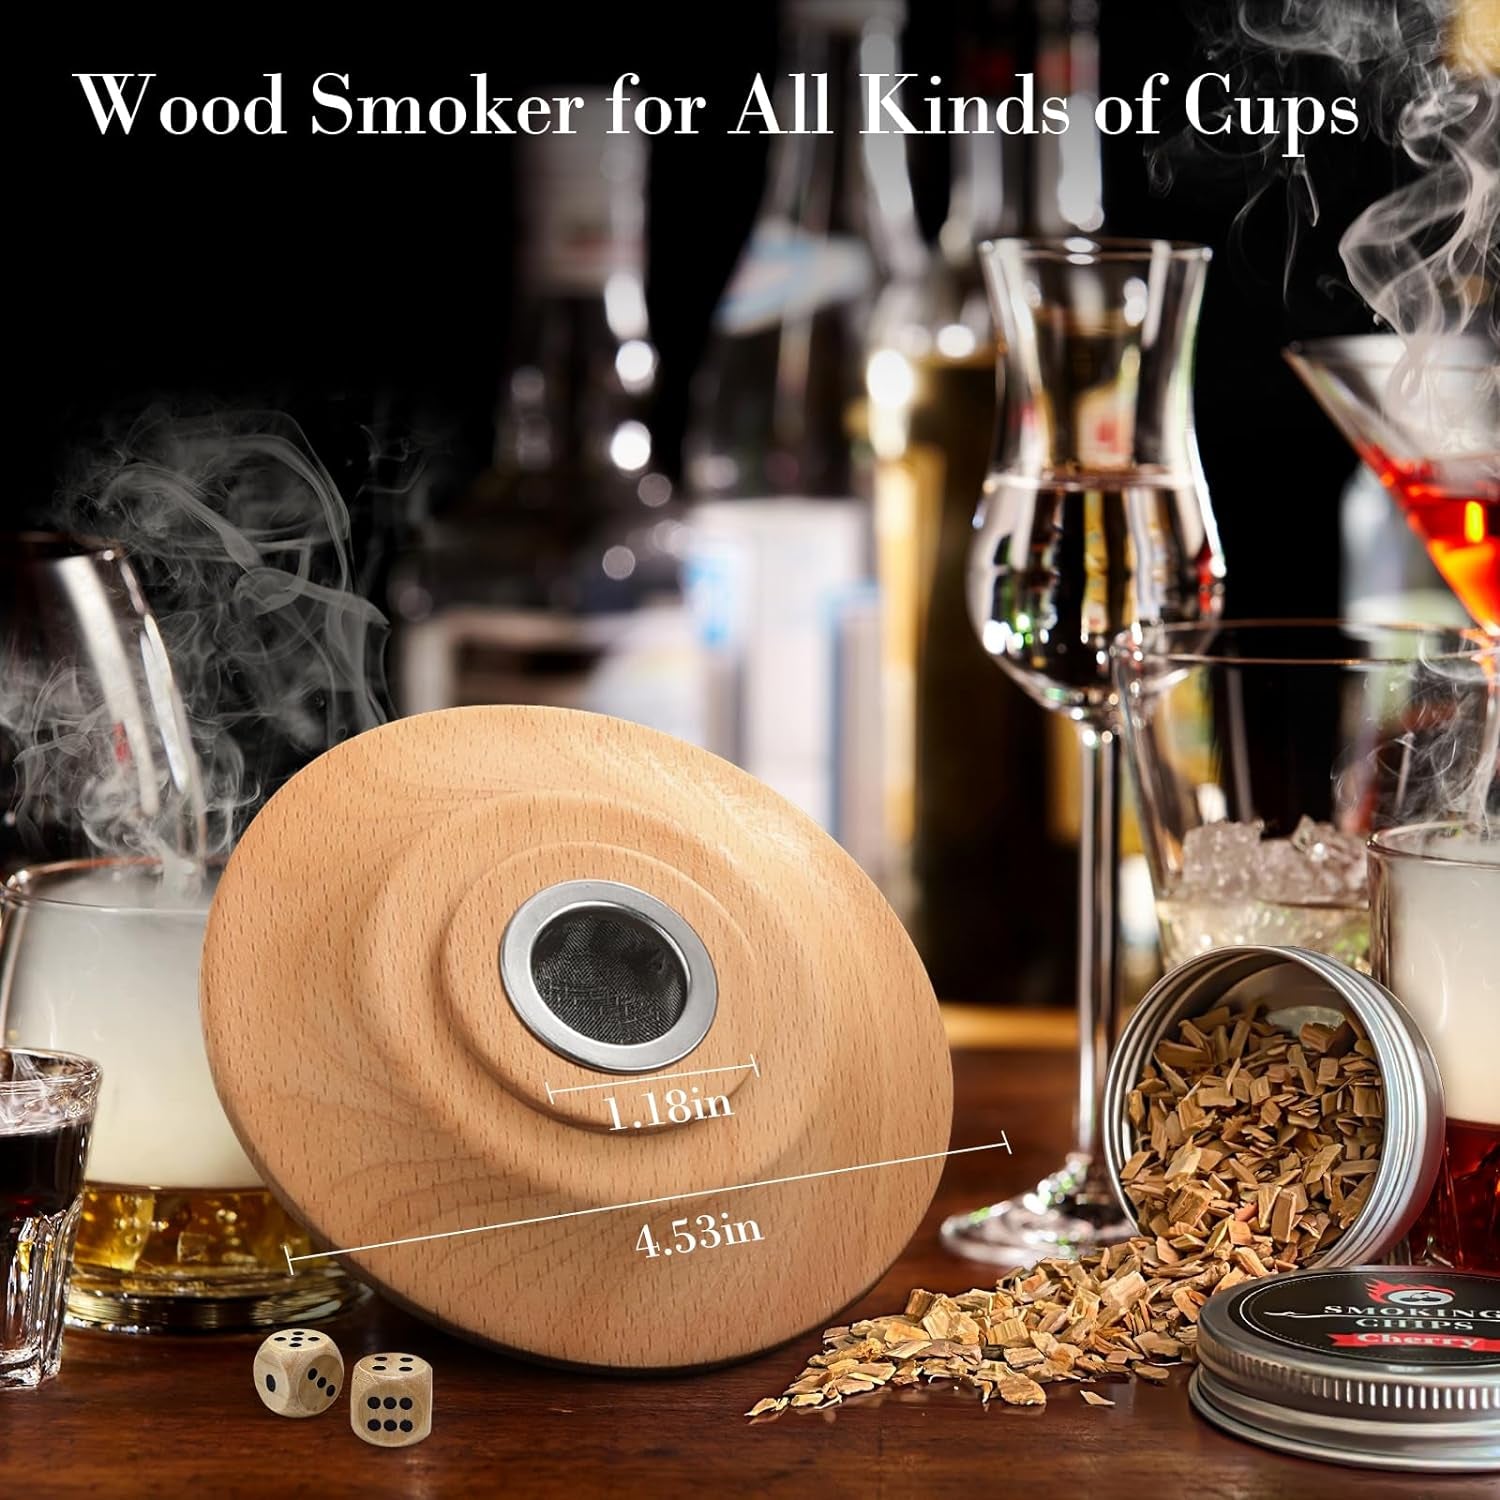 Cocktail Smoker Kit with Torch - 8 Flavors Wood Chips - Old Fashioned Cocktail Kit, Whiskey Smoker Kit, Drink Smoker, Whiskey, Birthday Bourbon Gifts for Men, Dad, Husband (Without Butane)